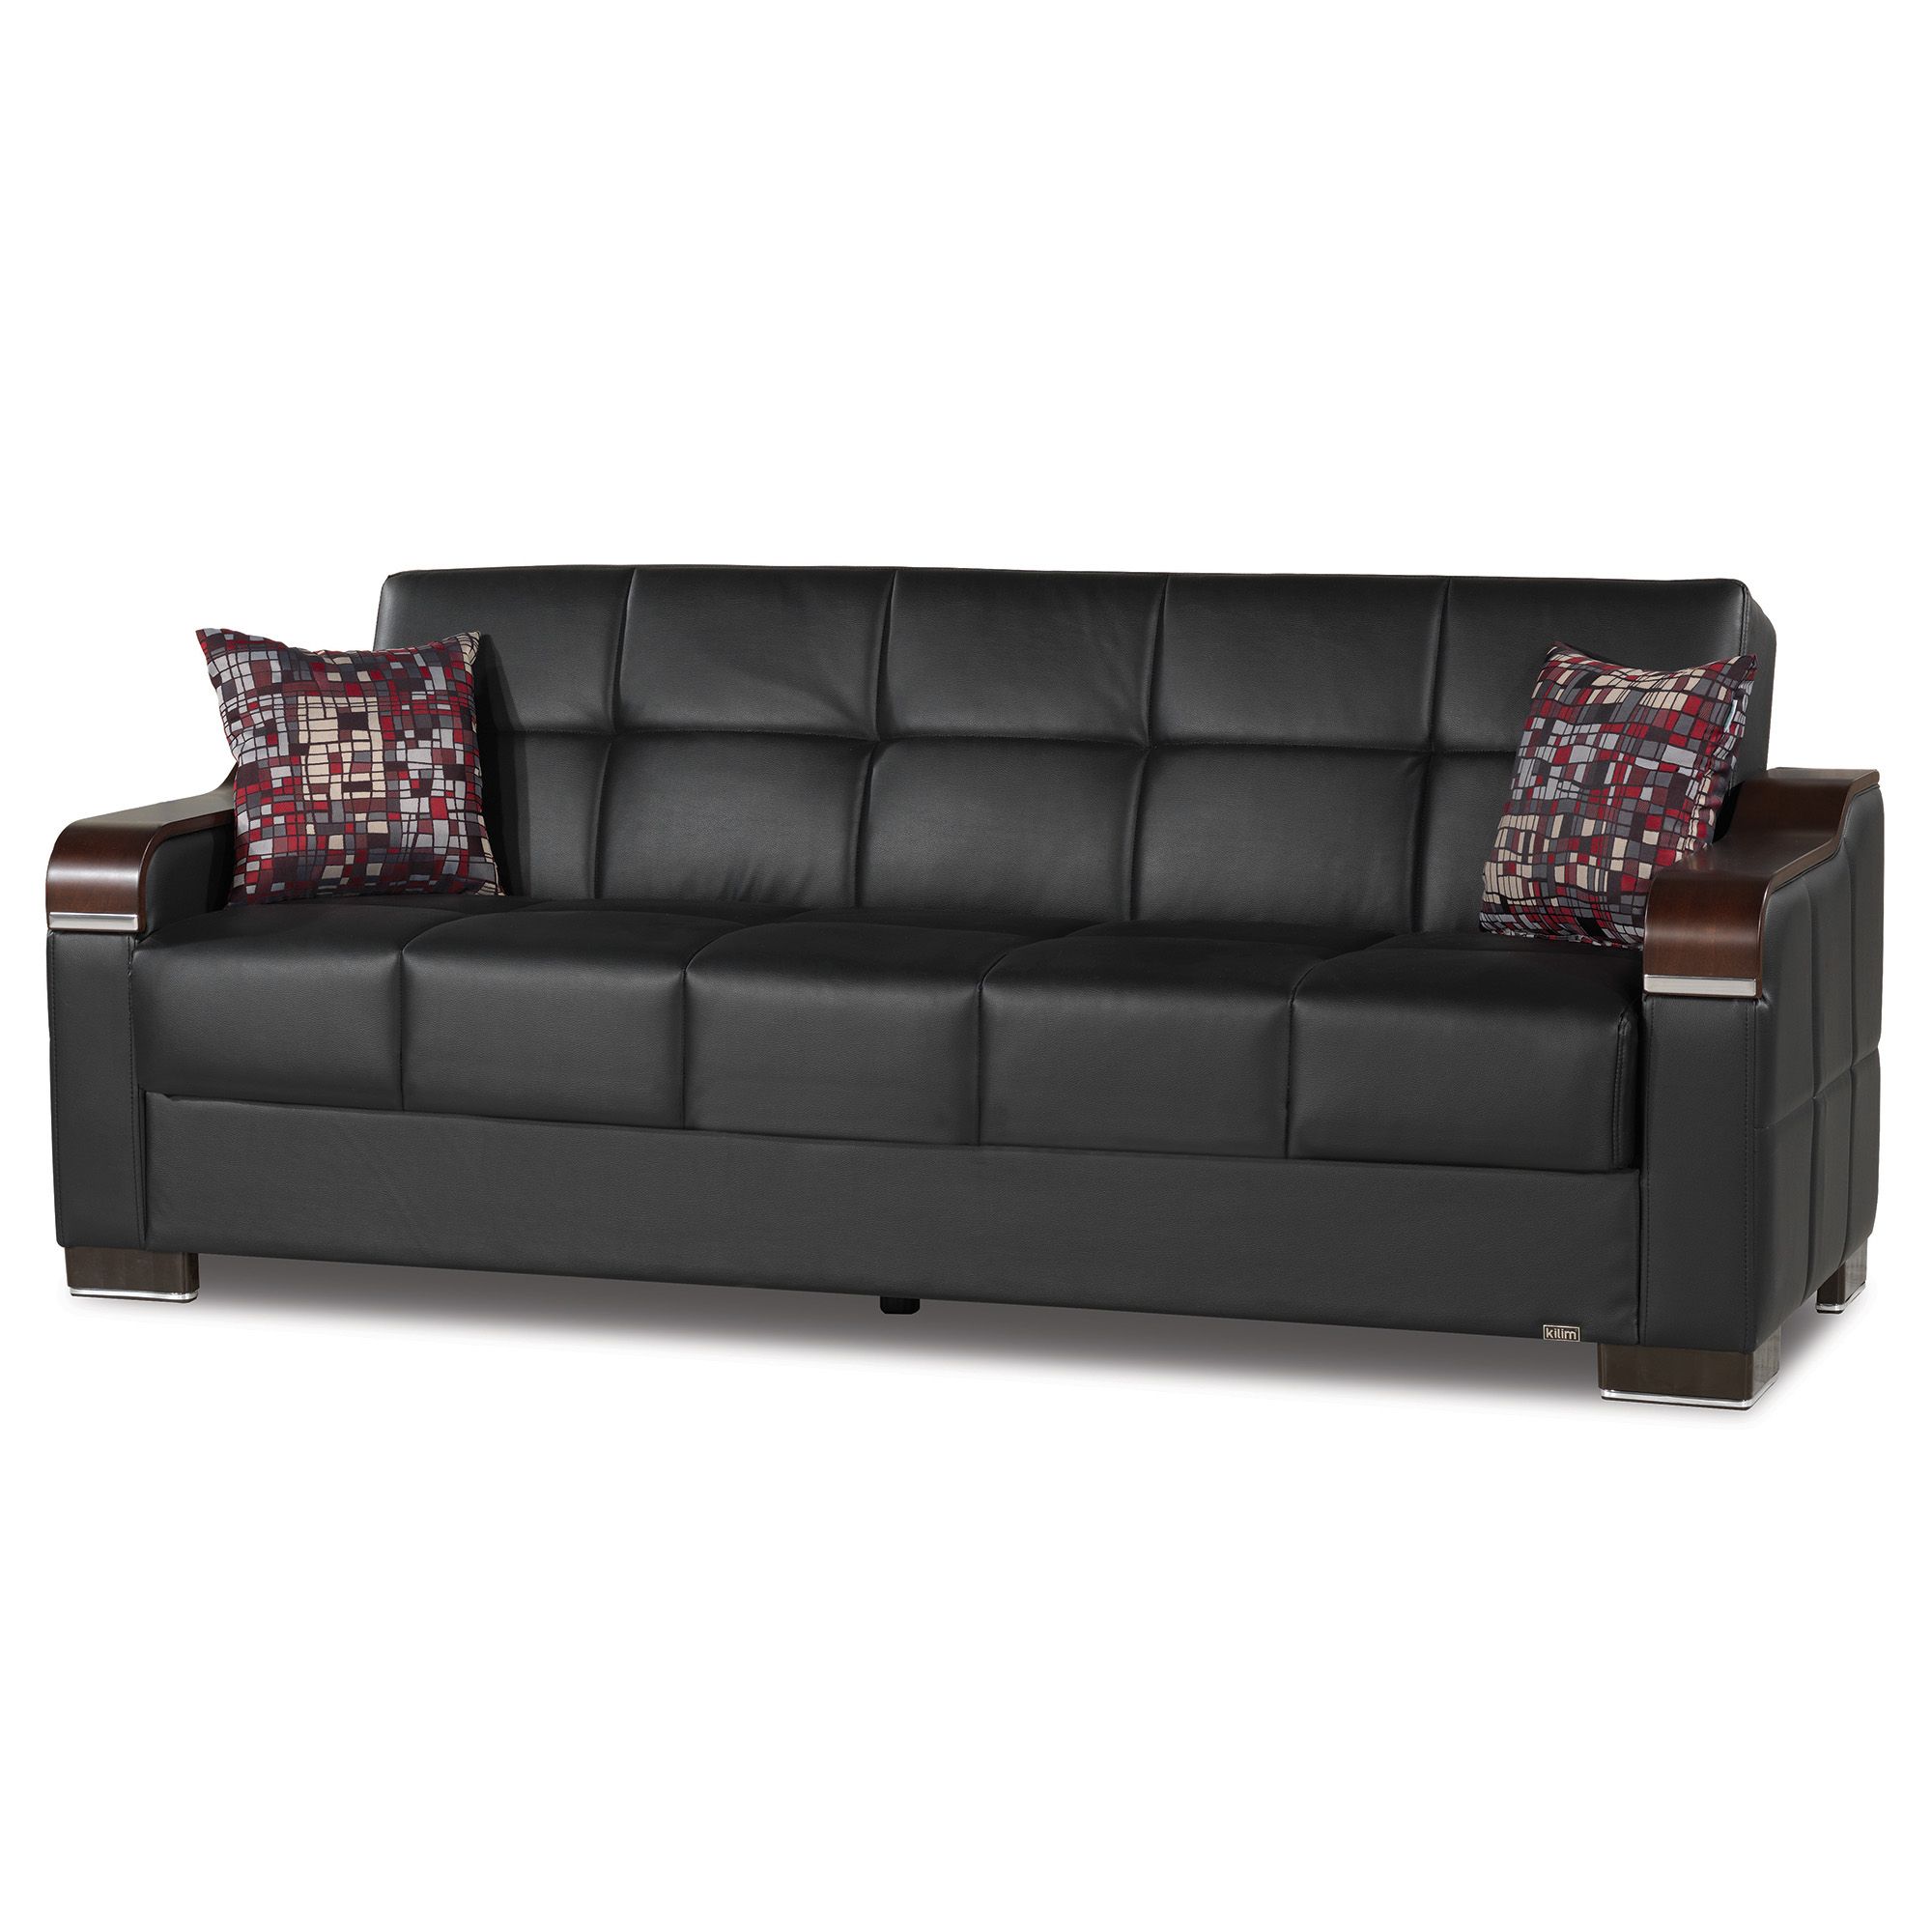 Uptown Leather Wooden Accent Arm Sleeper Sofa Bed With With Hartford Storage Sectional Futon Sofas (View 2 of 15)